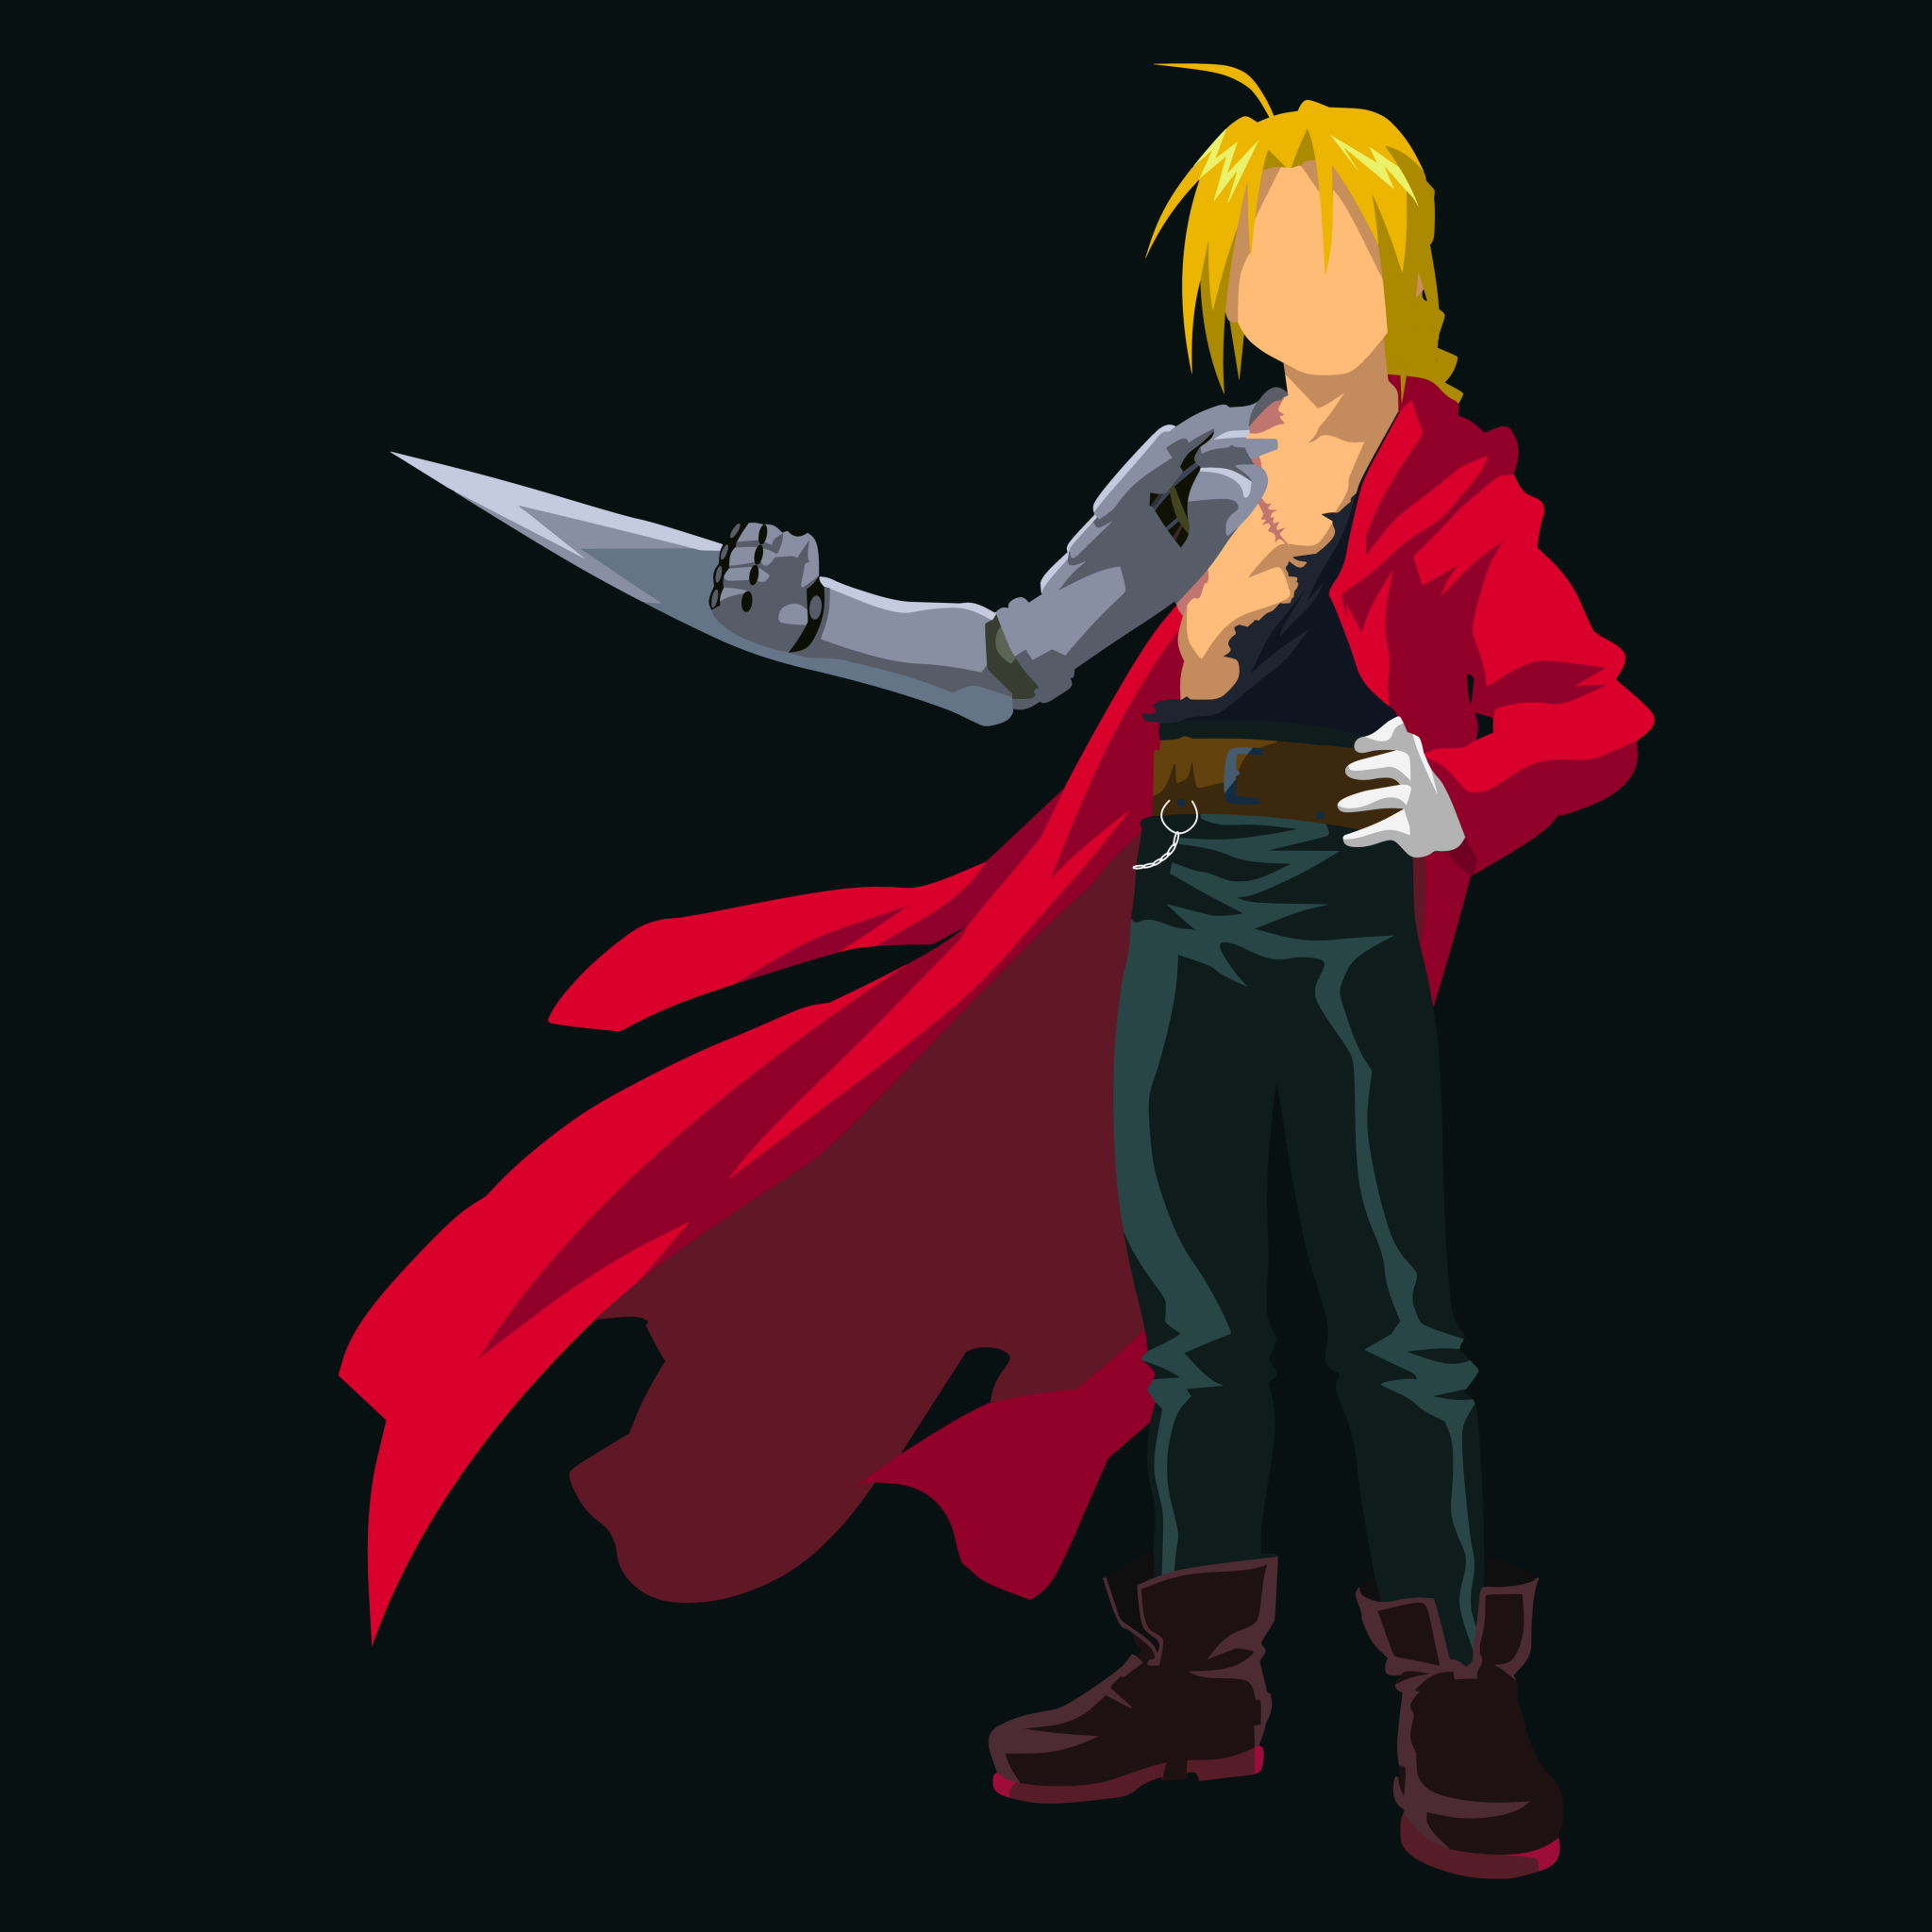 6 Edward Elric Wallpapers for iPhone and Android by Lee Martin